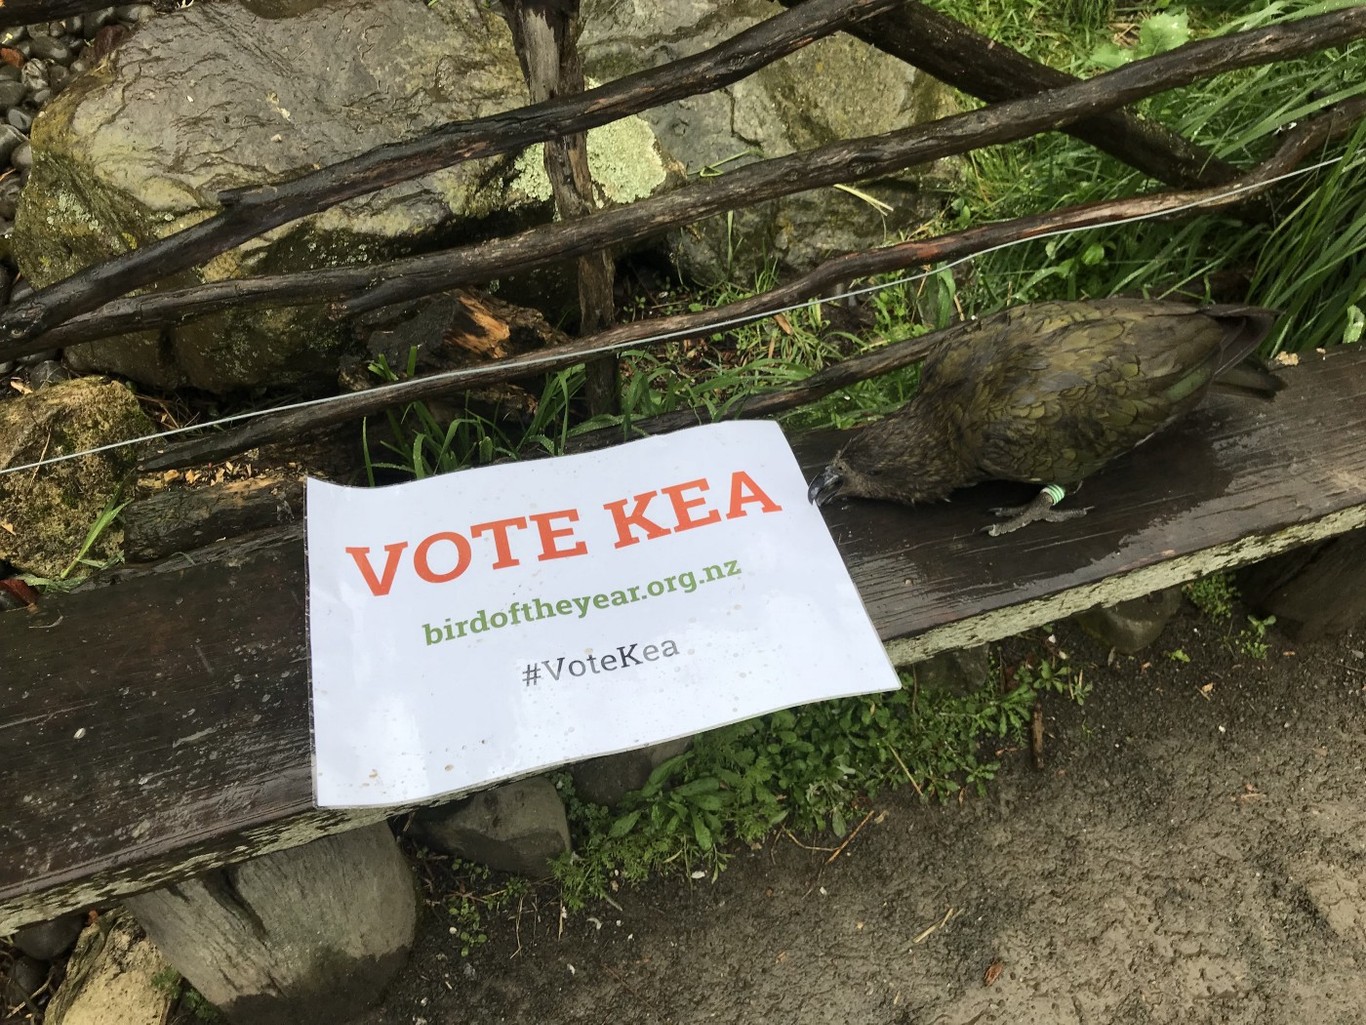 Kea interacting with a Vote Kea sign